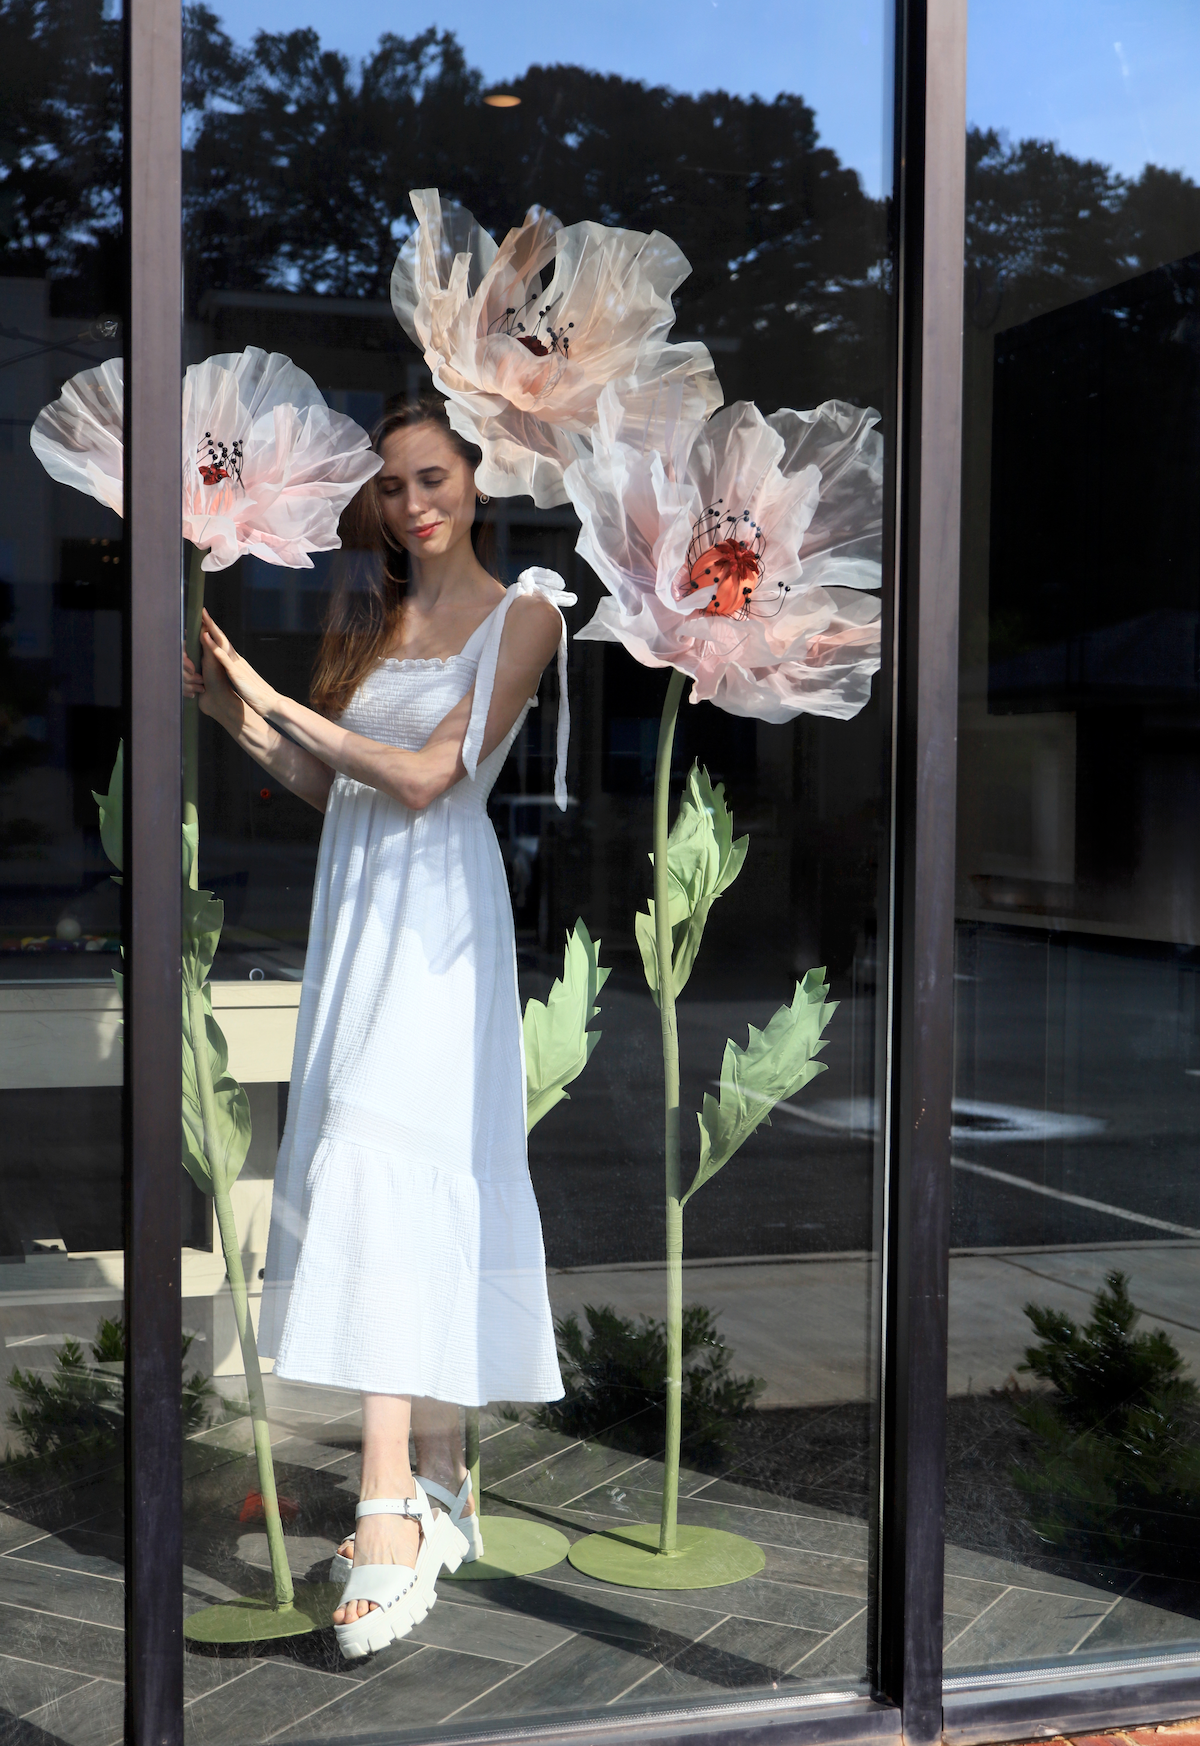 Storefront Visual design with Giant Flowers